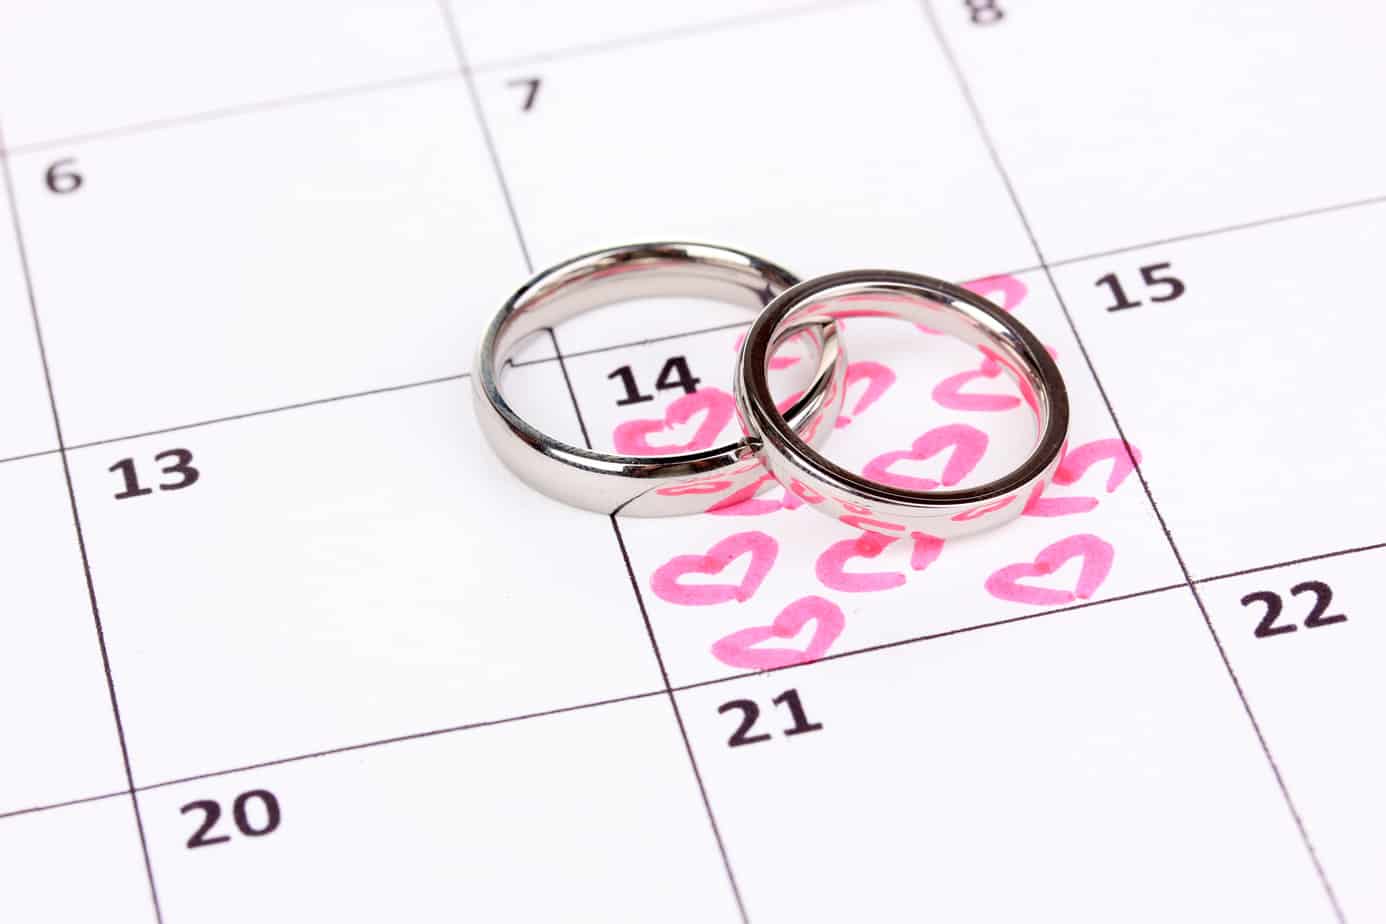 Top tips for planning on your wedding